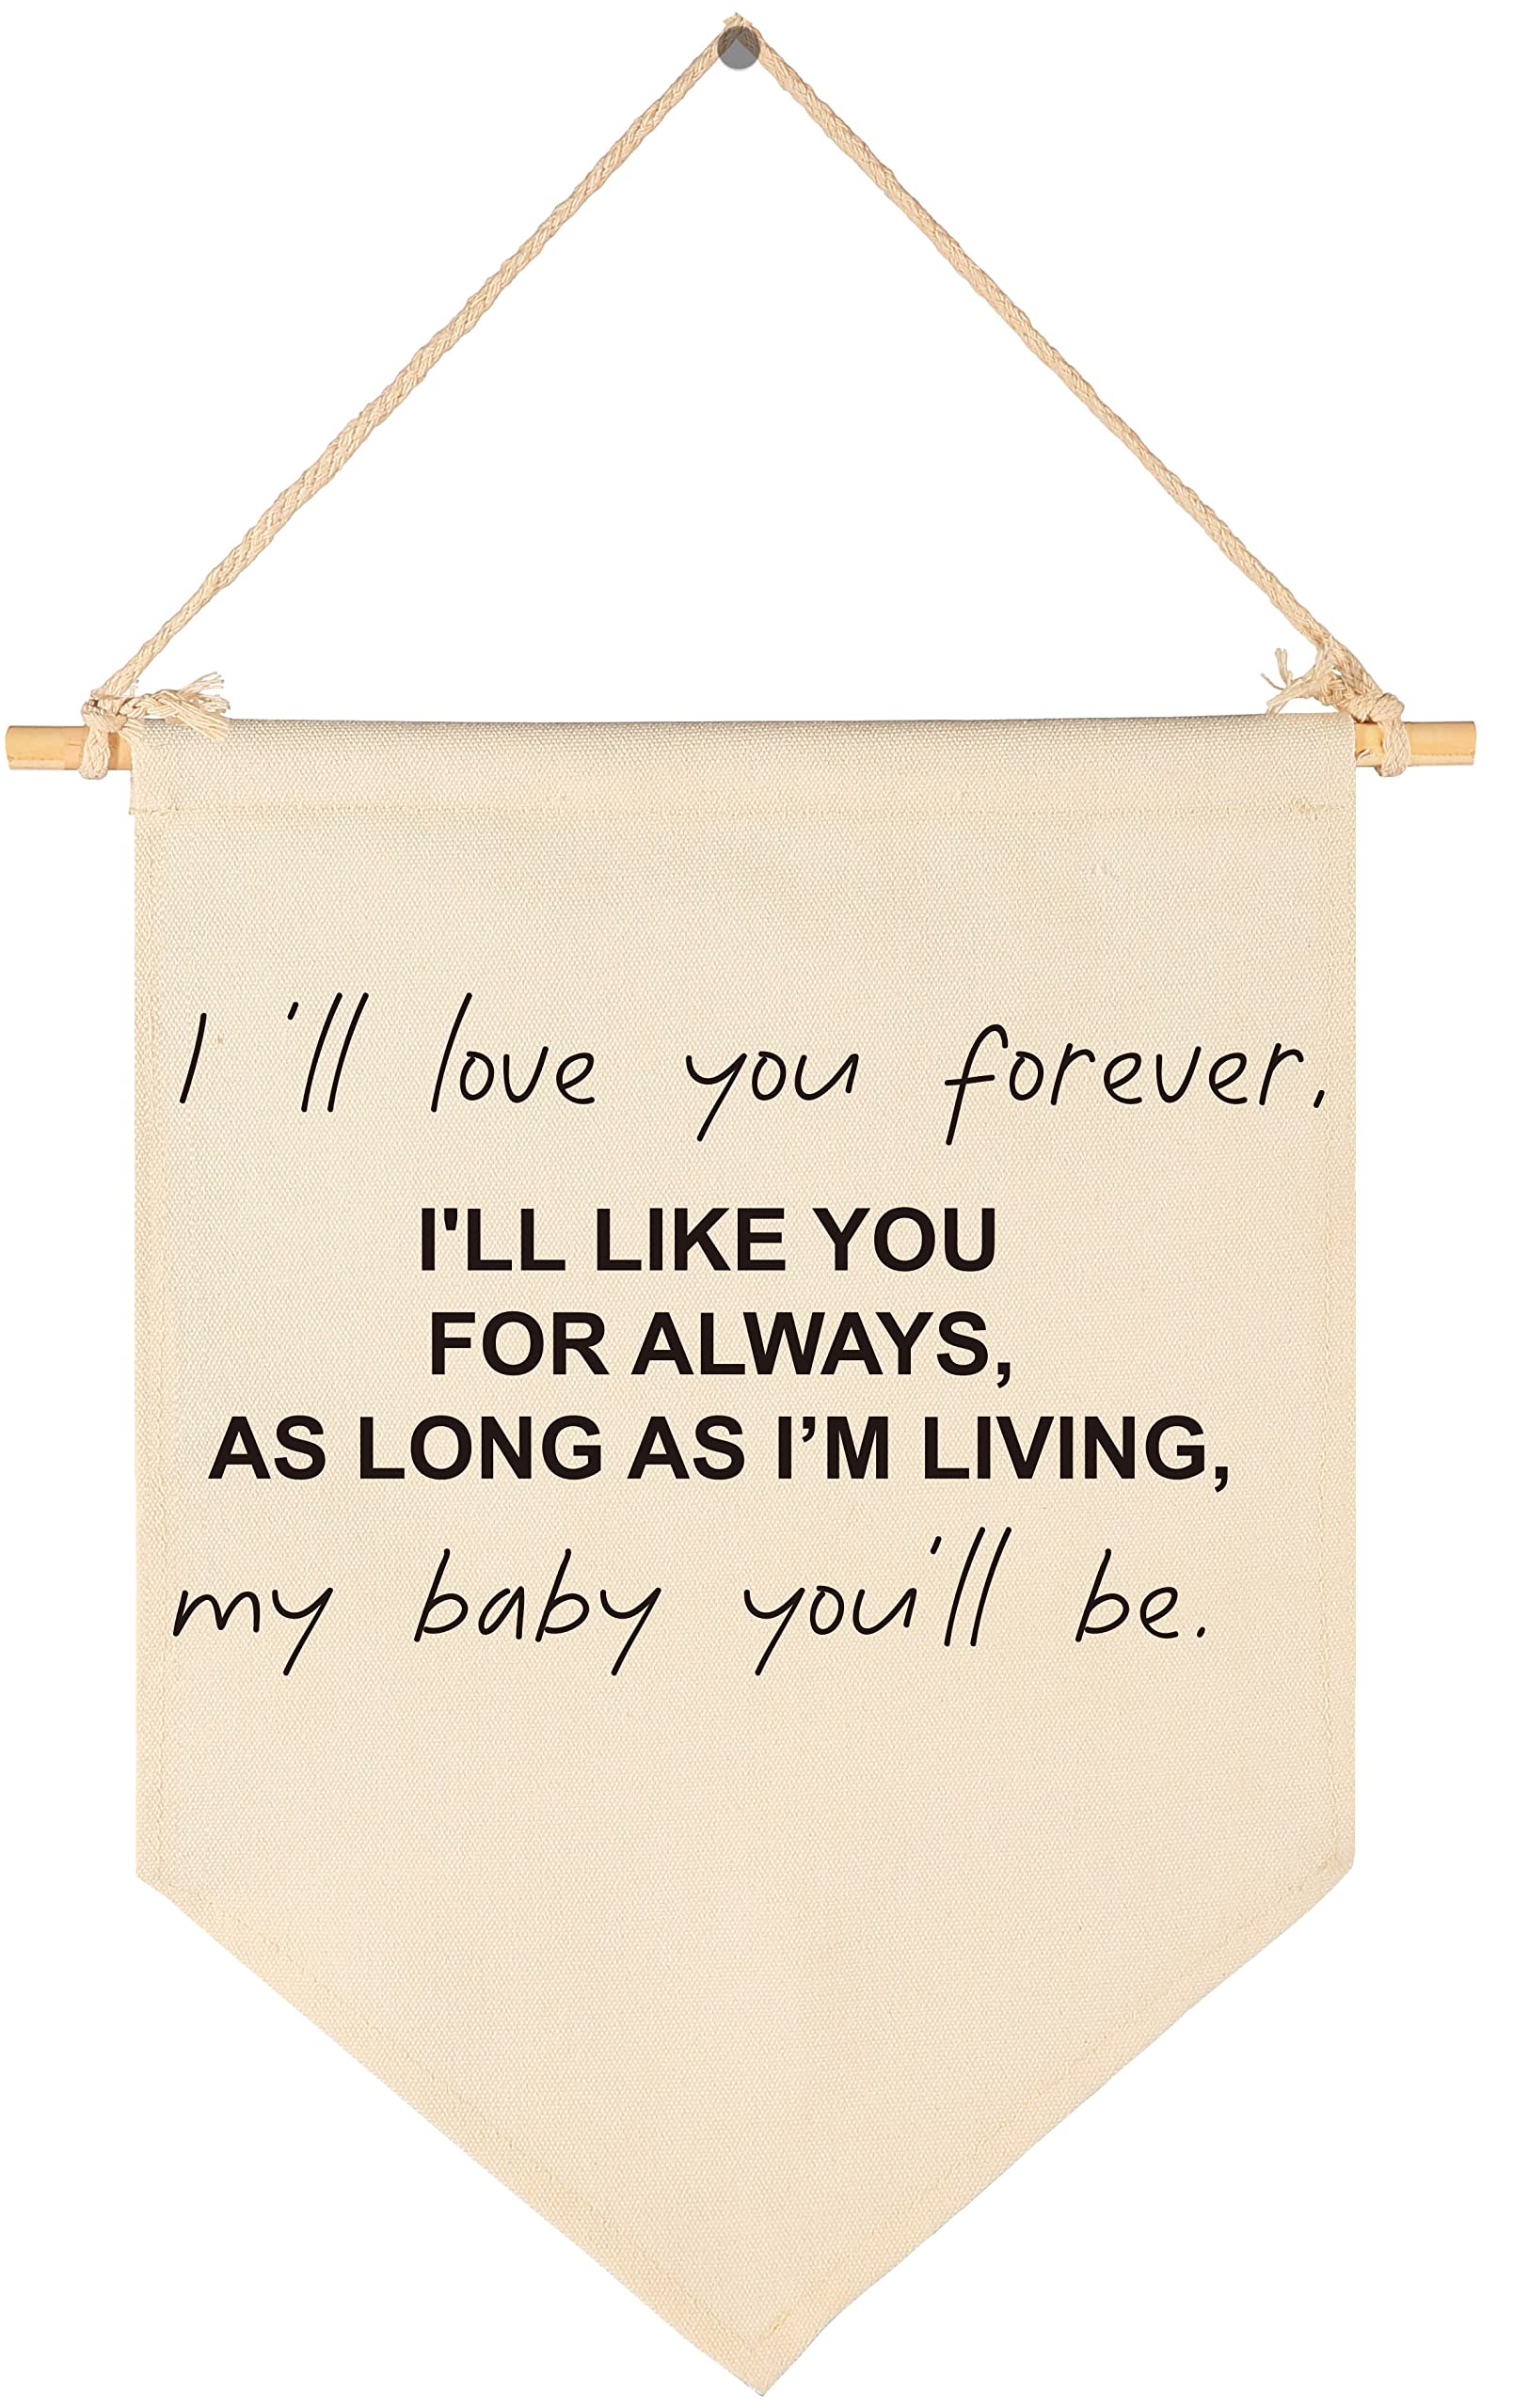 FYSIA Nursery Room Sign-  Ill Love You Forever - Canvas Hanging Pennant Flag Banner Wall Sign Decor Gift For Nursery Bedroom Playroom 